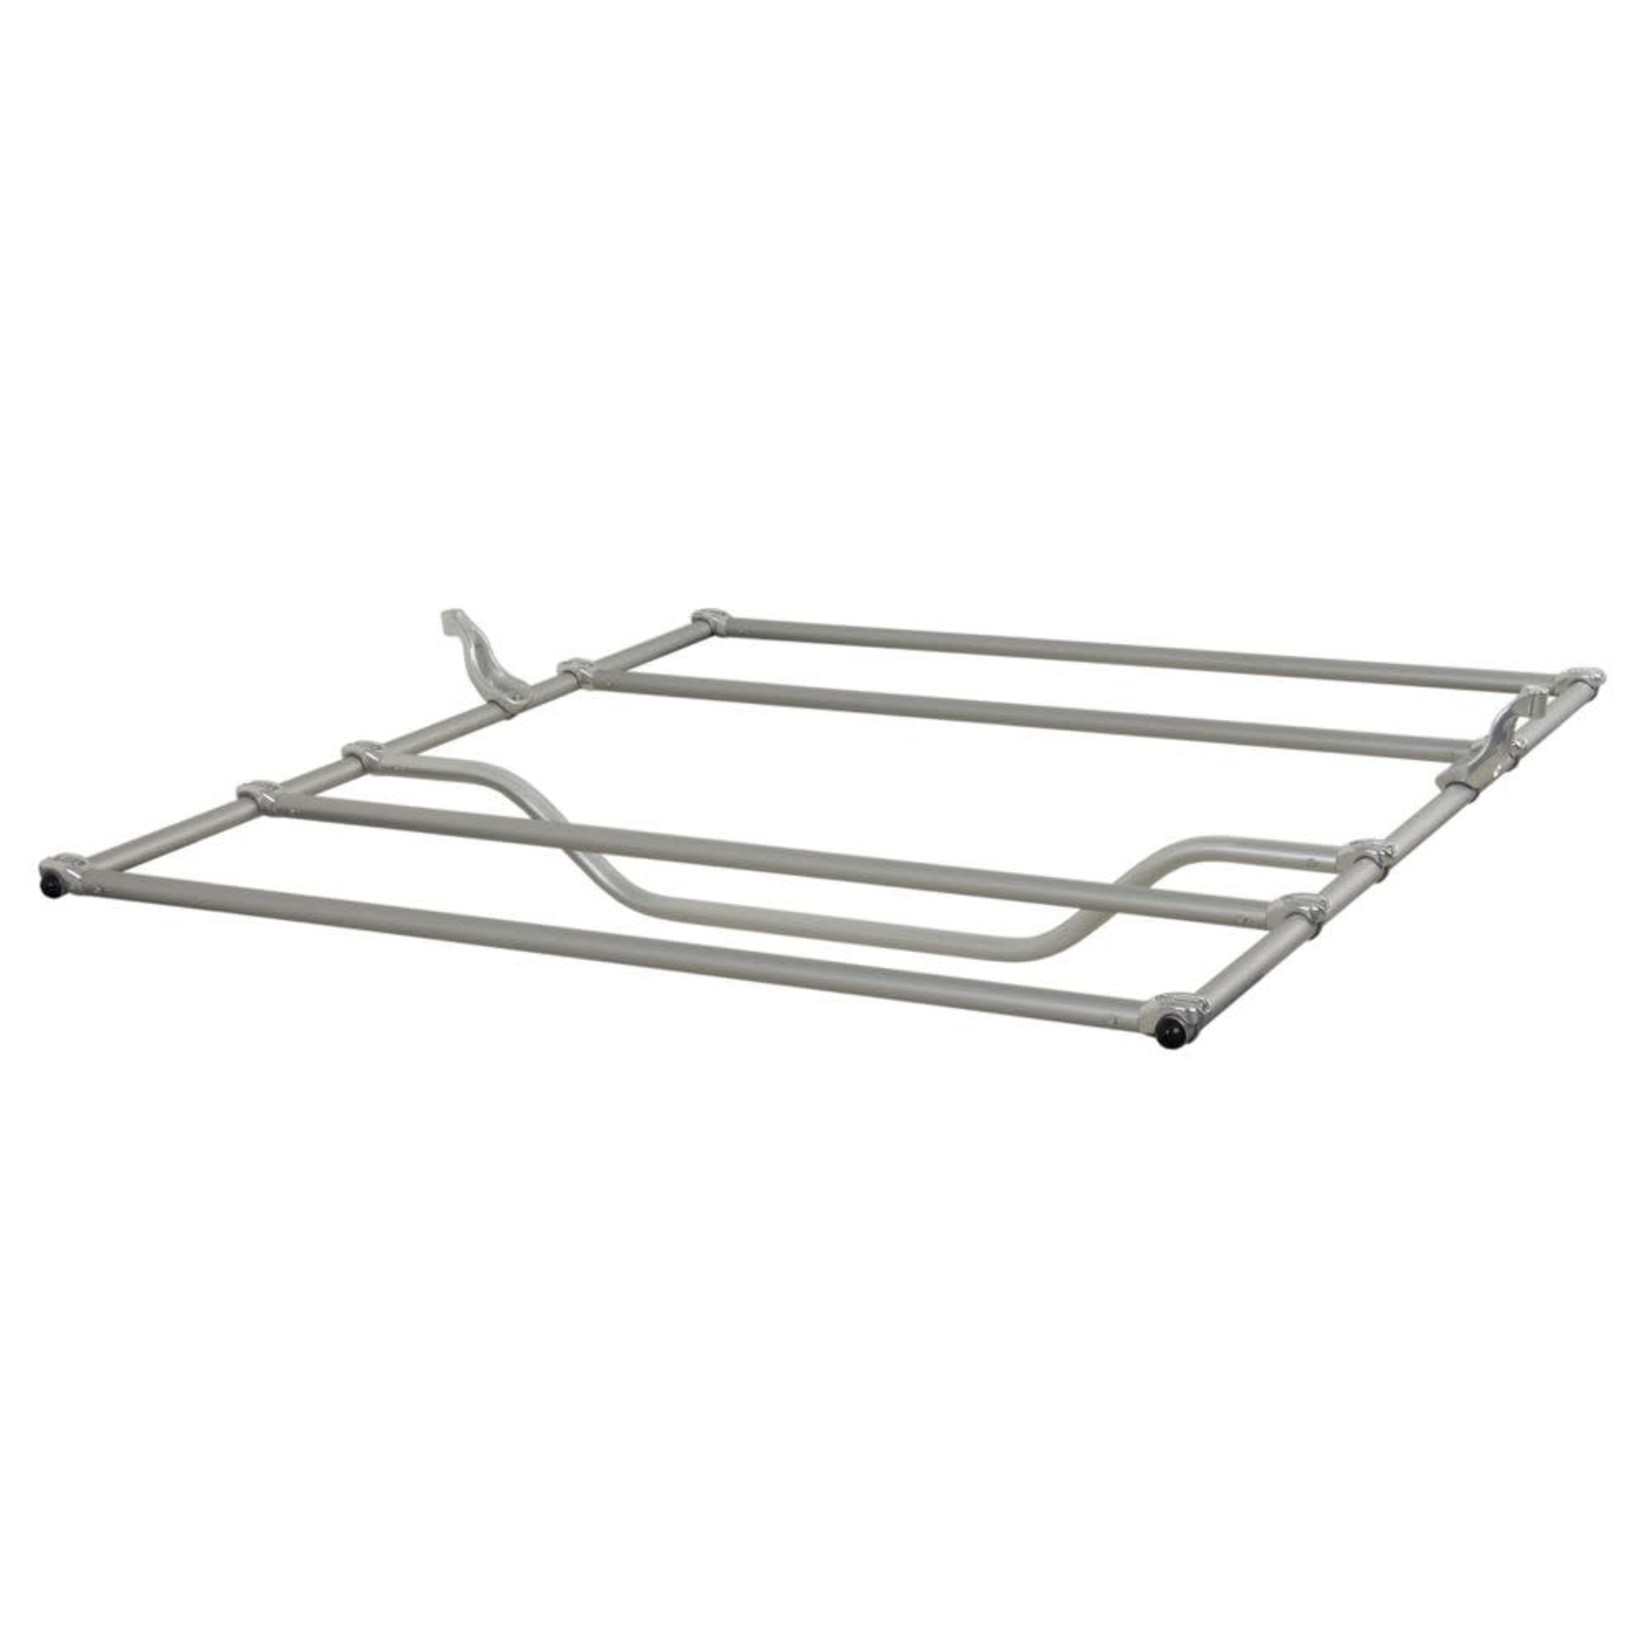 NRS NRS Compact Outfitter Raft Frame